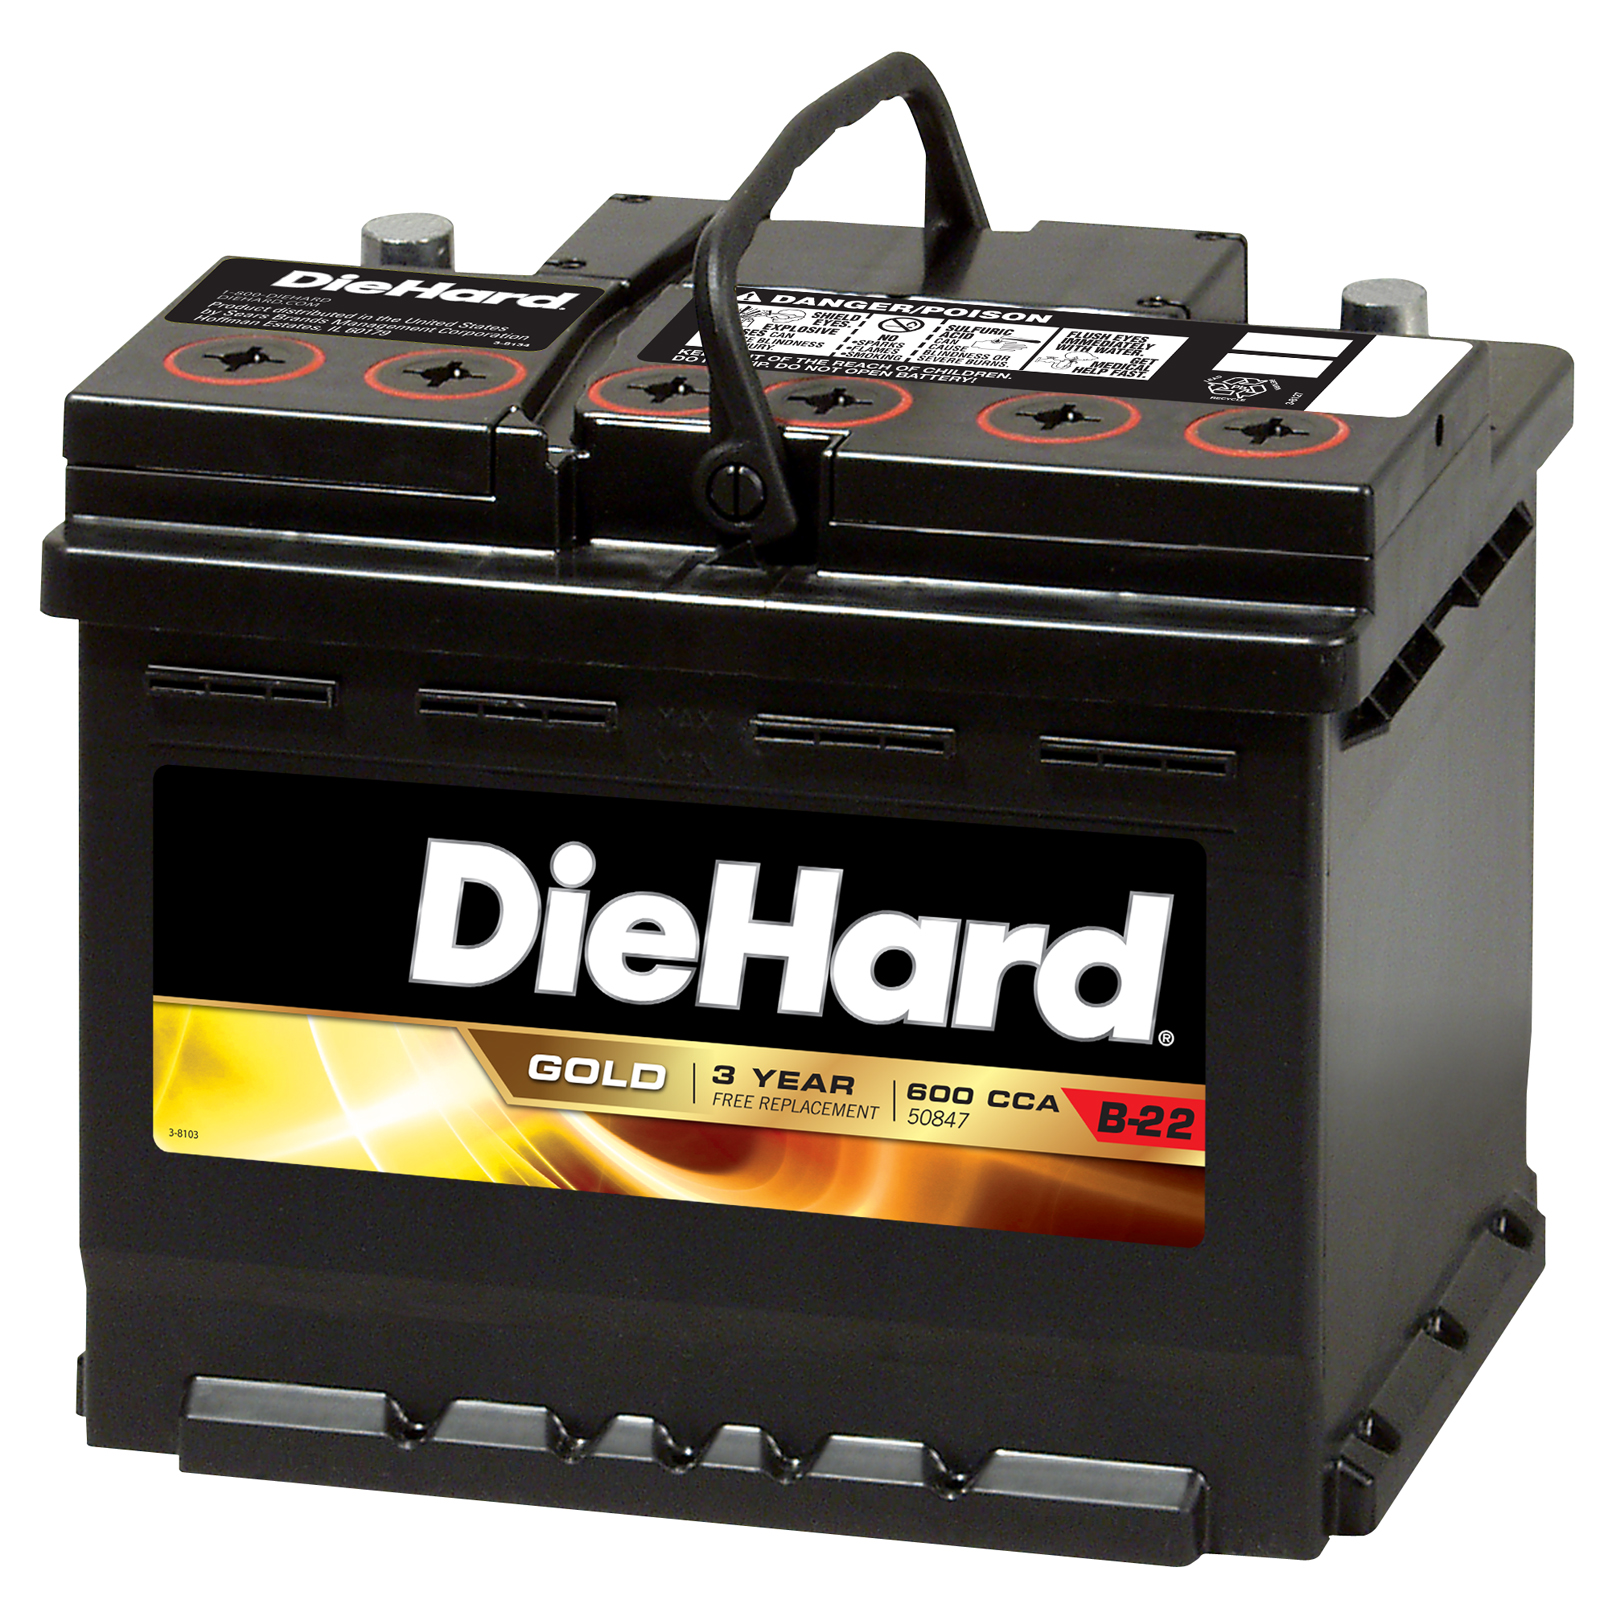 DieHard Gold Automotive Battery - Group Size EP-47 (Price with Exchange)